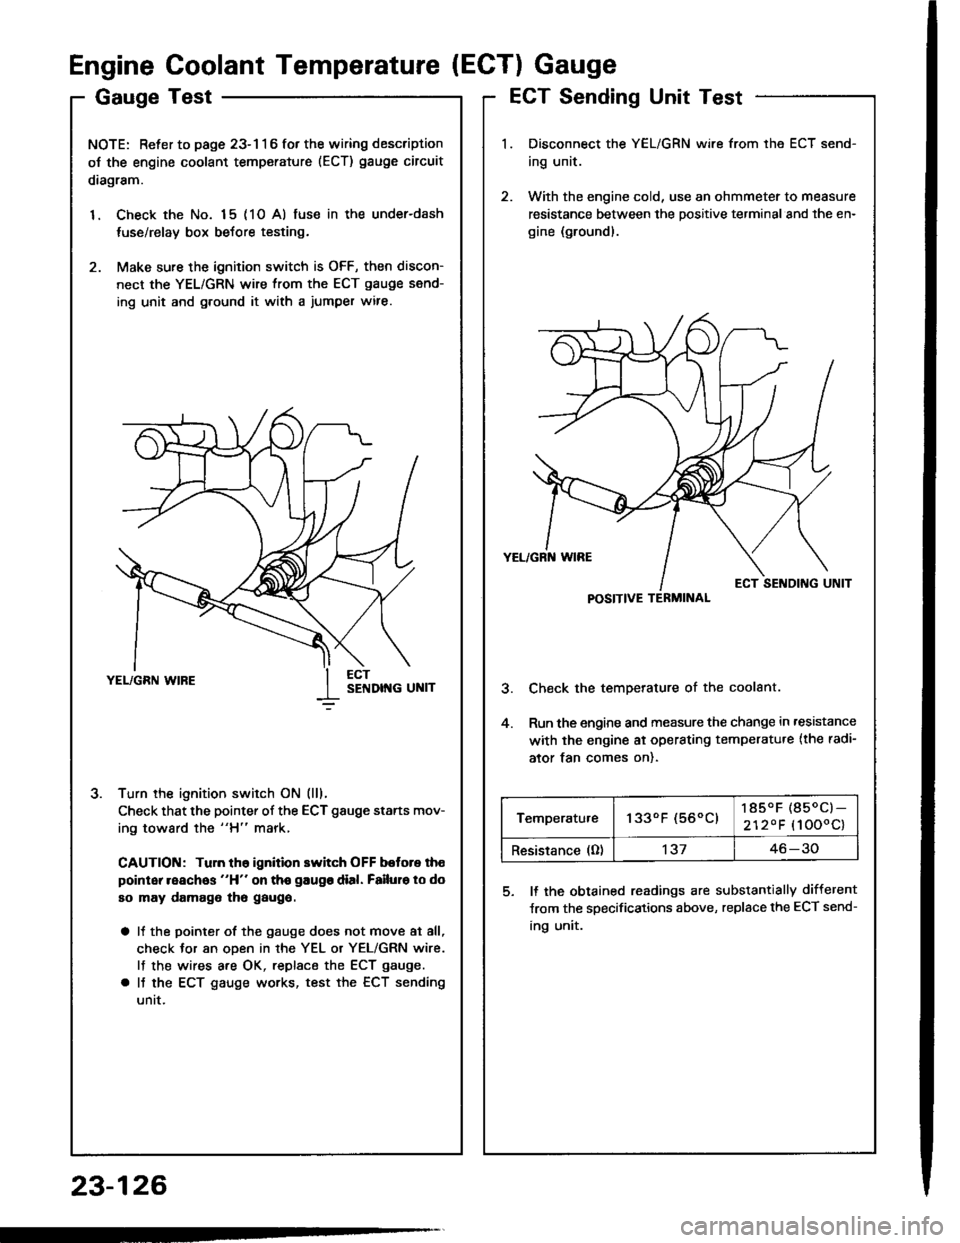 HONDA INTEGRA 1994 4.G Workshop Manual GaugeTest
NOTE: Refer to page 23-116 fot the wiring description
oJ the engine coolant temperature (ECT) gauge circuit
diagram.
1. Check the No. 15 (10 A) fuse in the under-dash
tuse/relay box before t